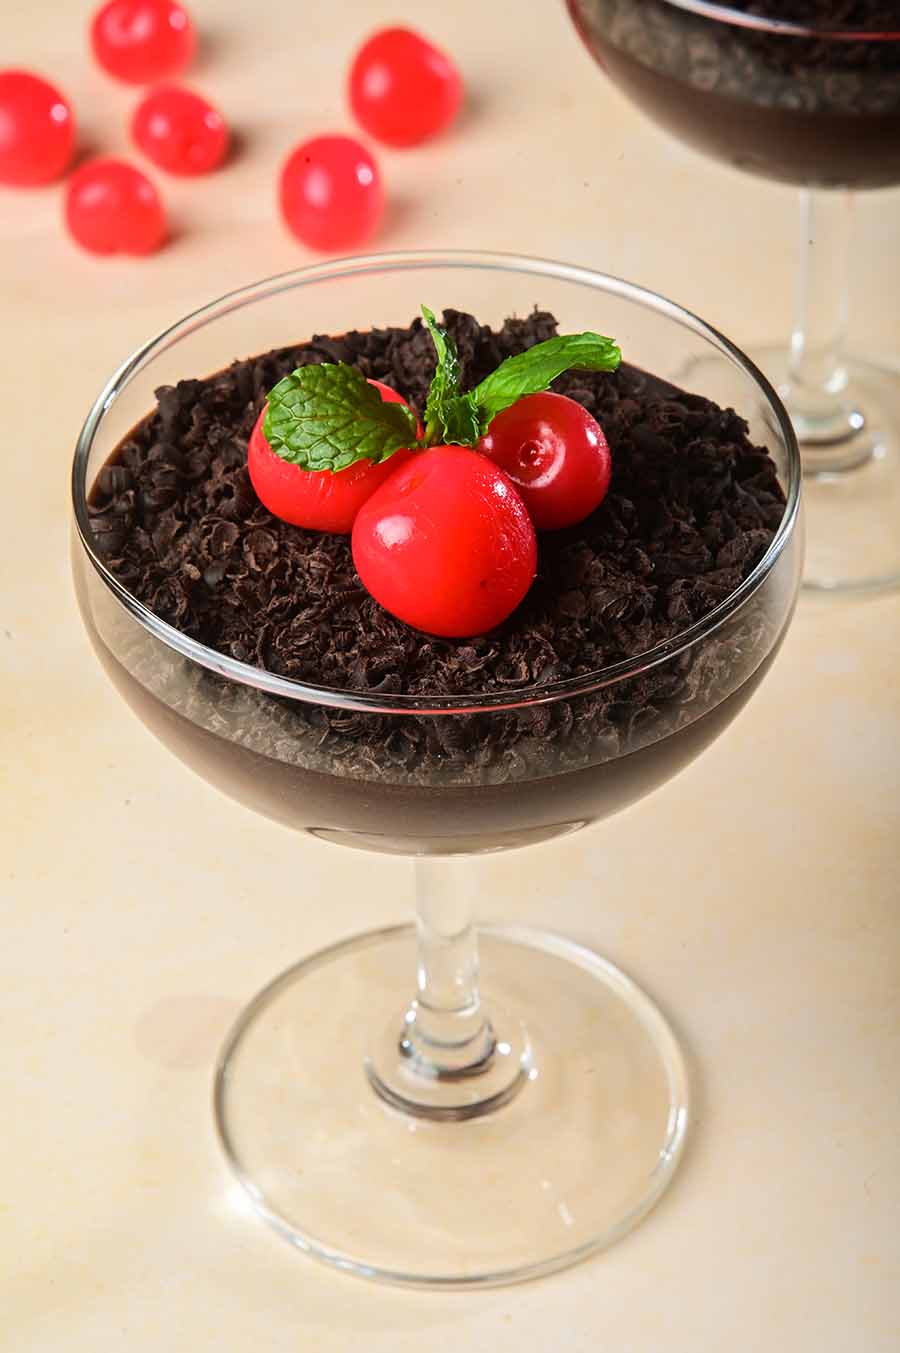 Everyone loves a good chocolate mousse. Chowman’s new Chocolate Mousse is a decadent creation of creamy dark chocolate, topped with red cherries